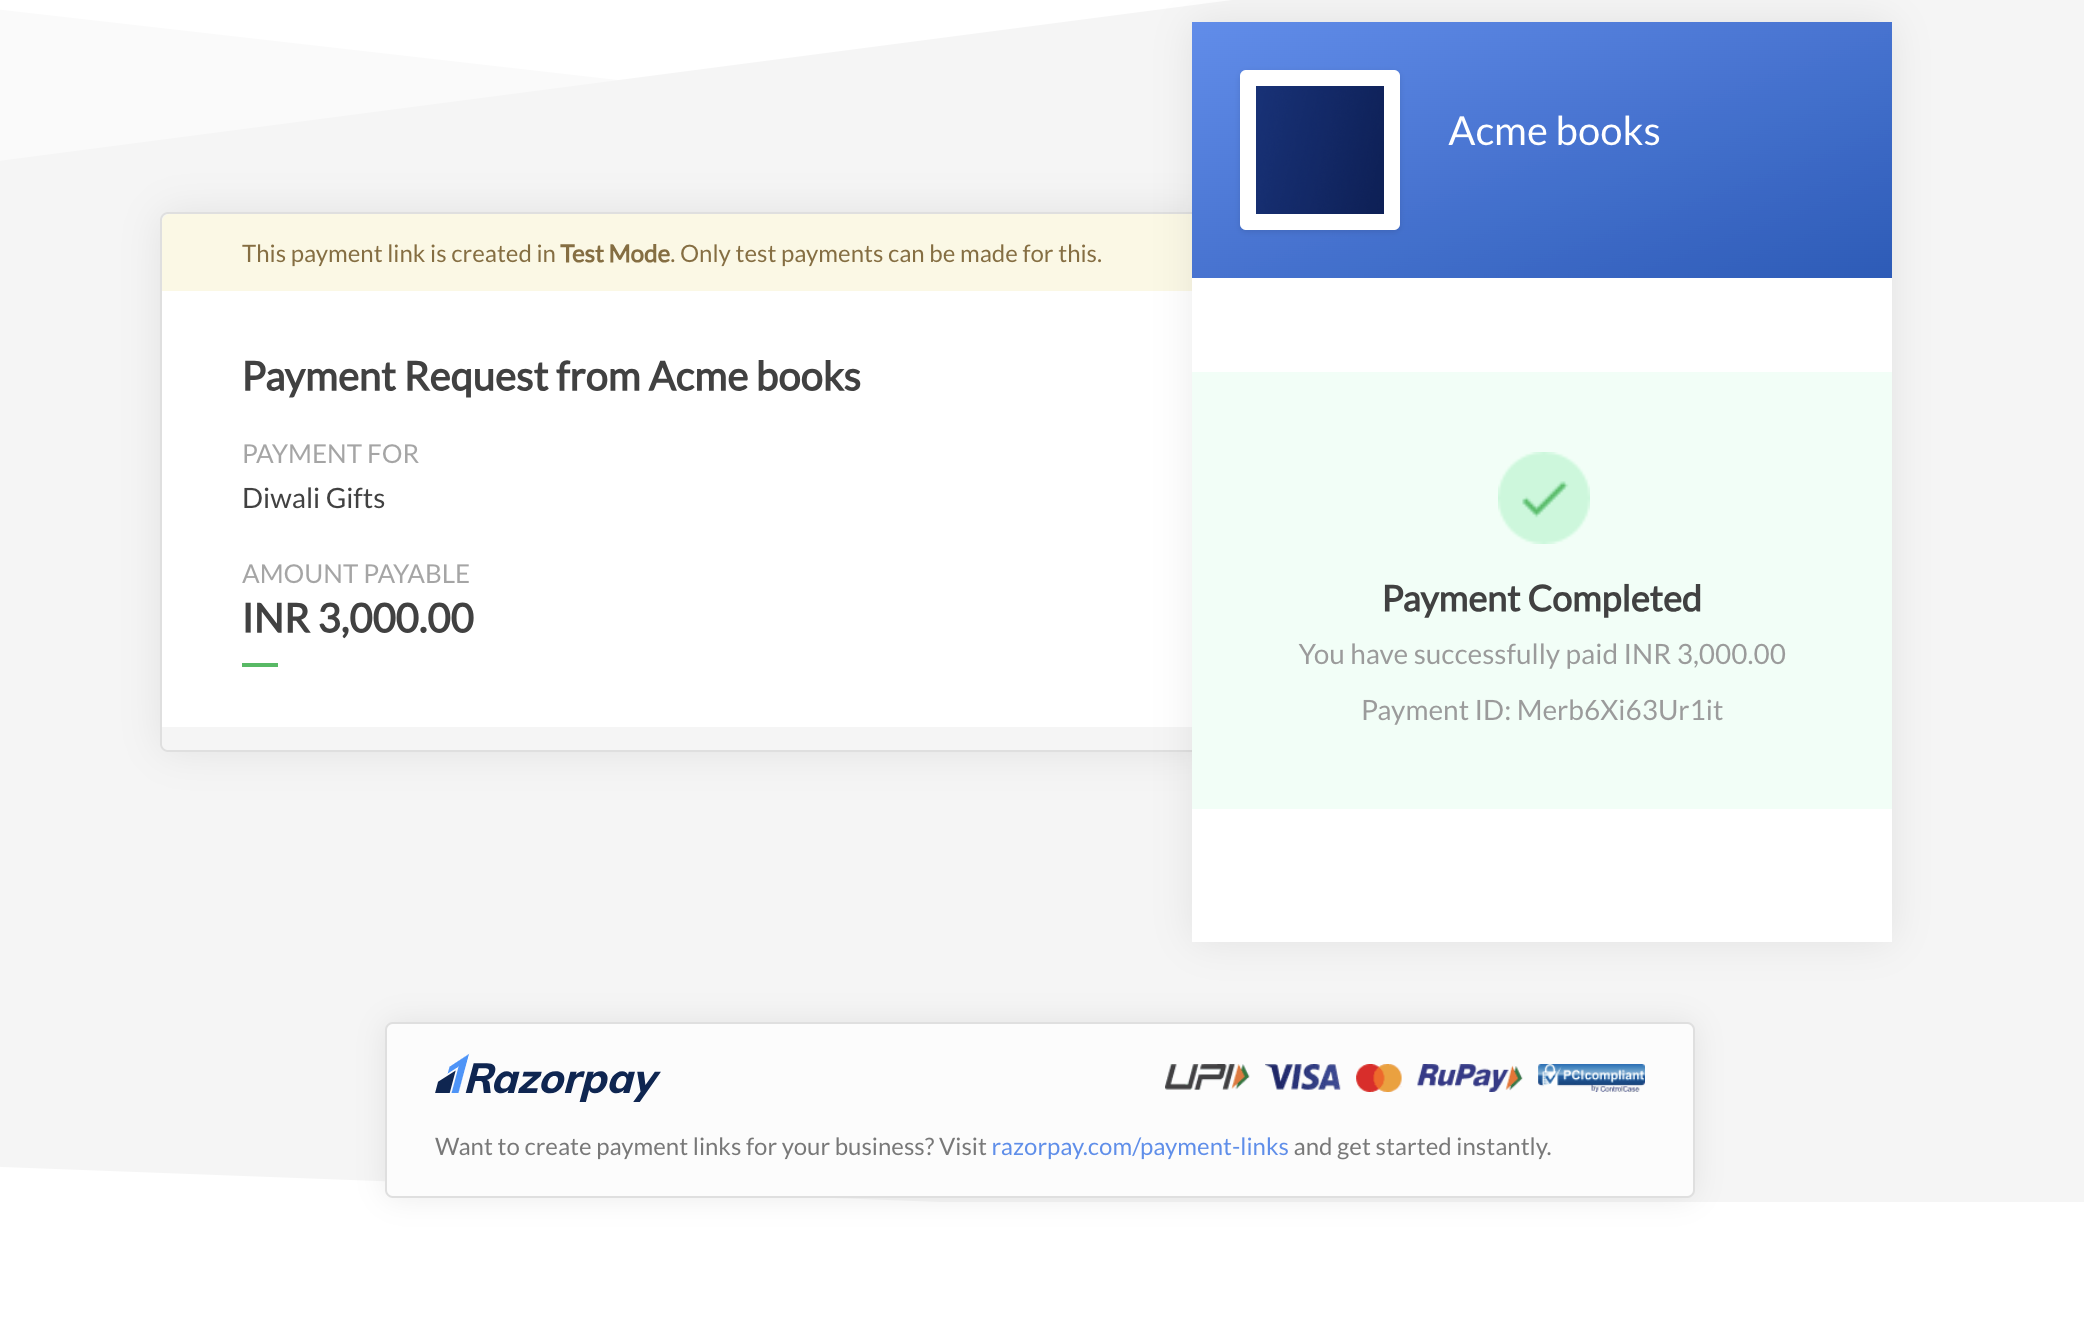 Successful payment confirmation message